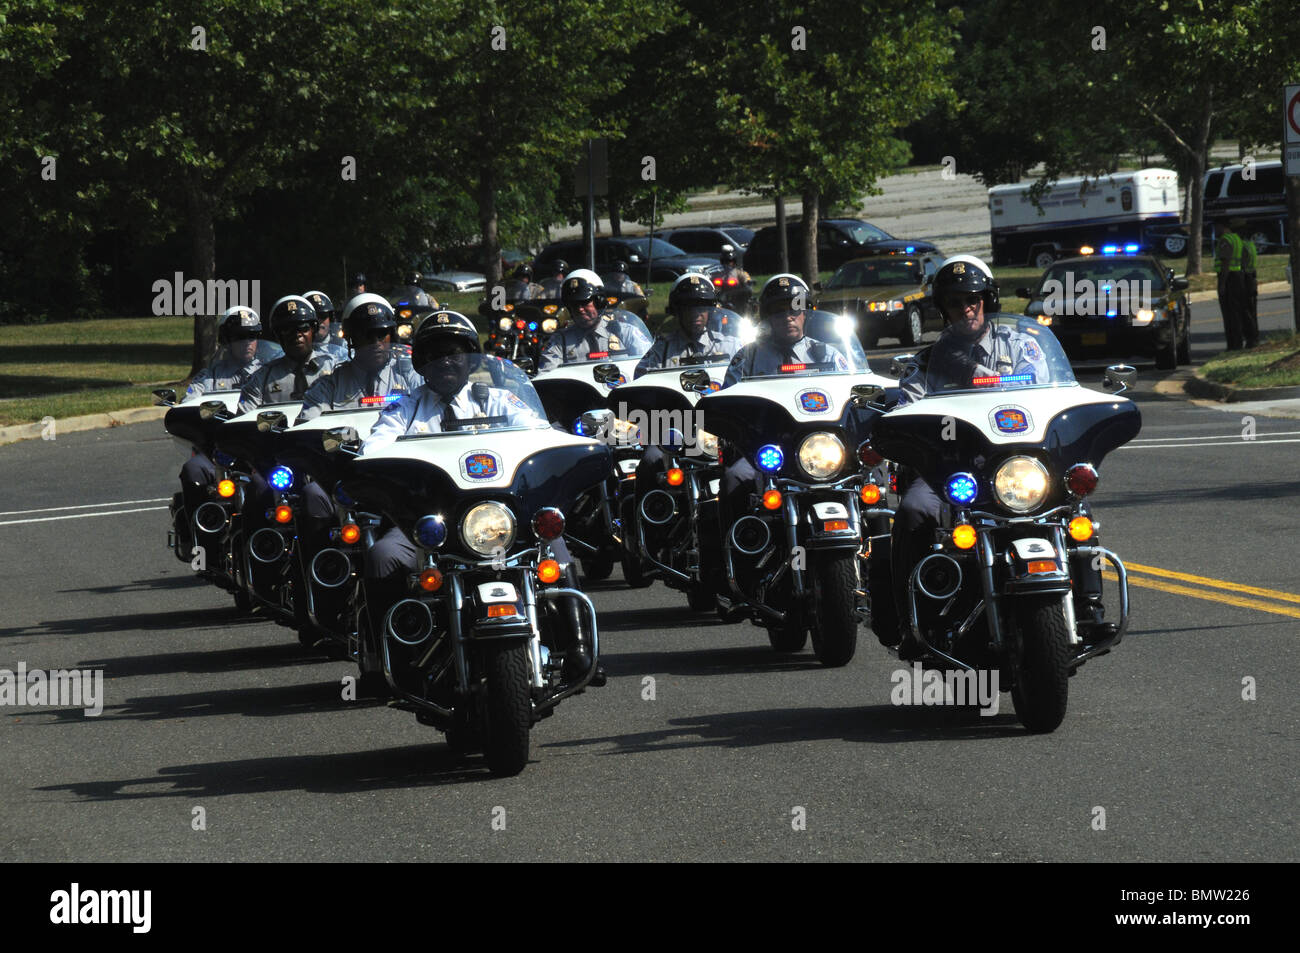 hundreds of police motorcycles escort the hearse containing the body of a Md State Trooper who was gunned down last week Stock Photo